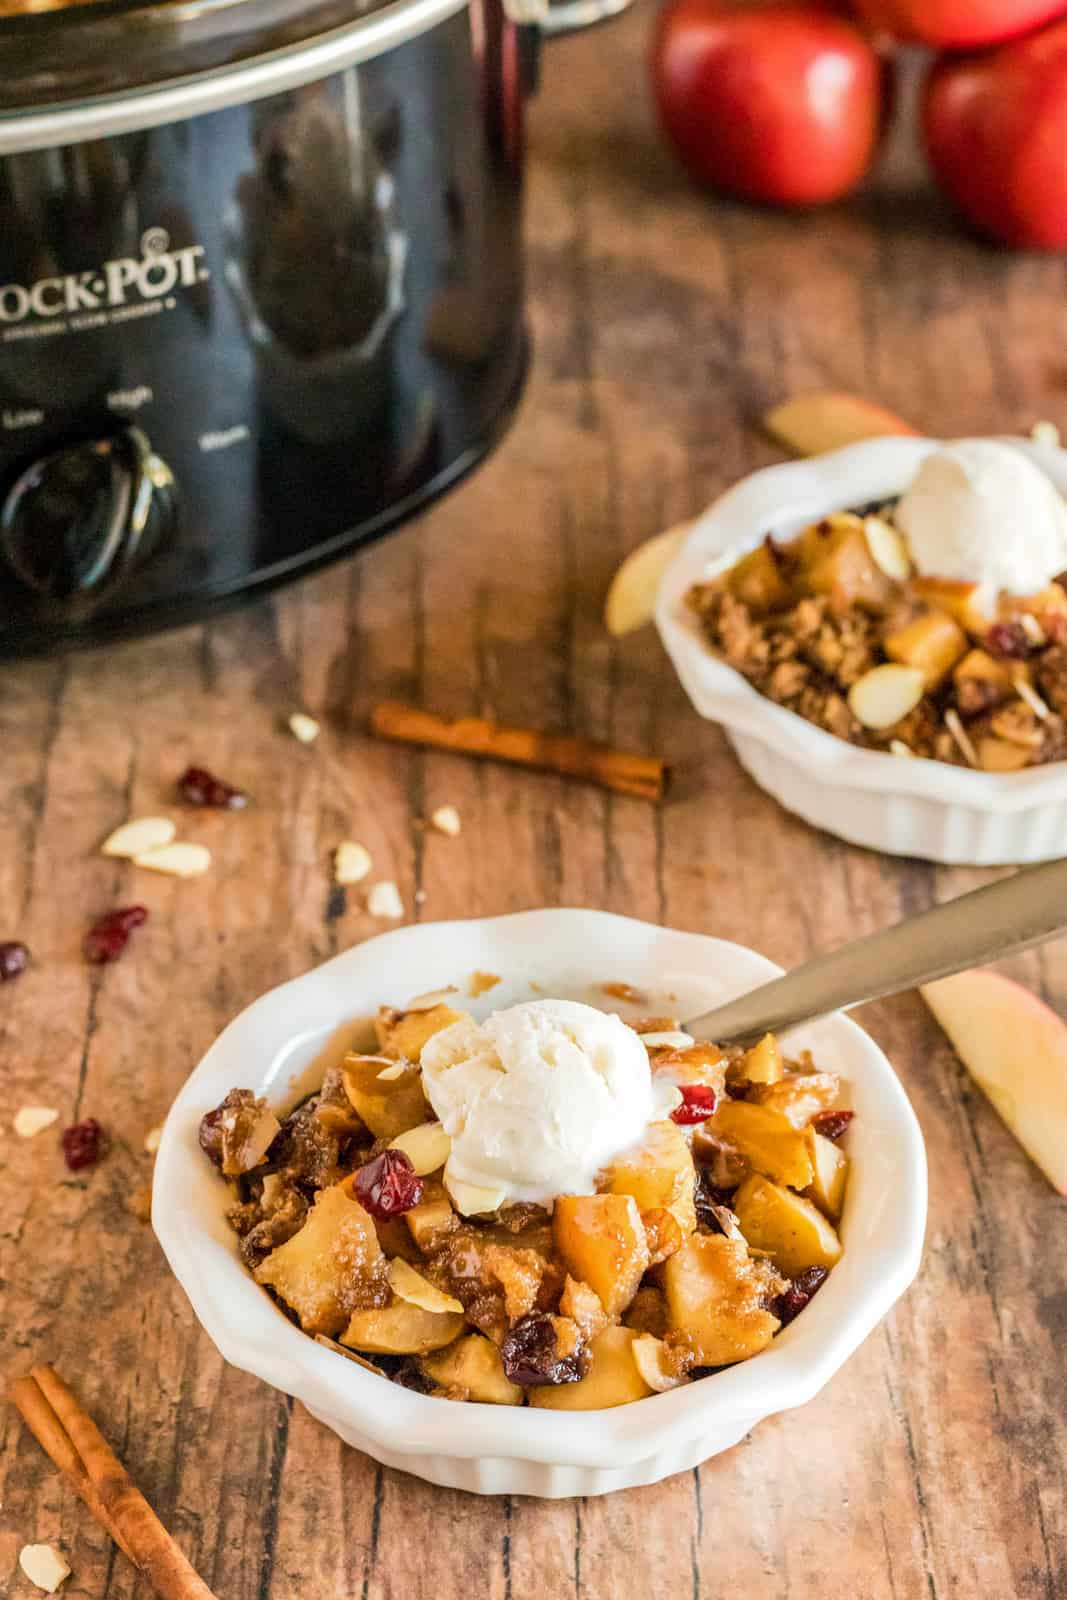 Two bowls of crumble with ice cream and spoon next to crockpot